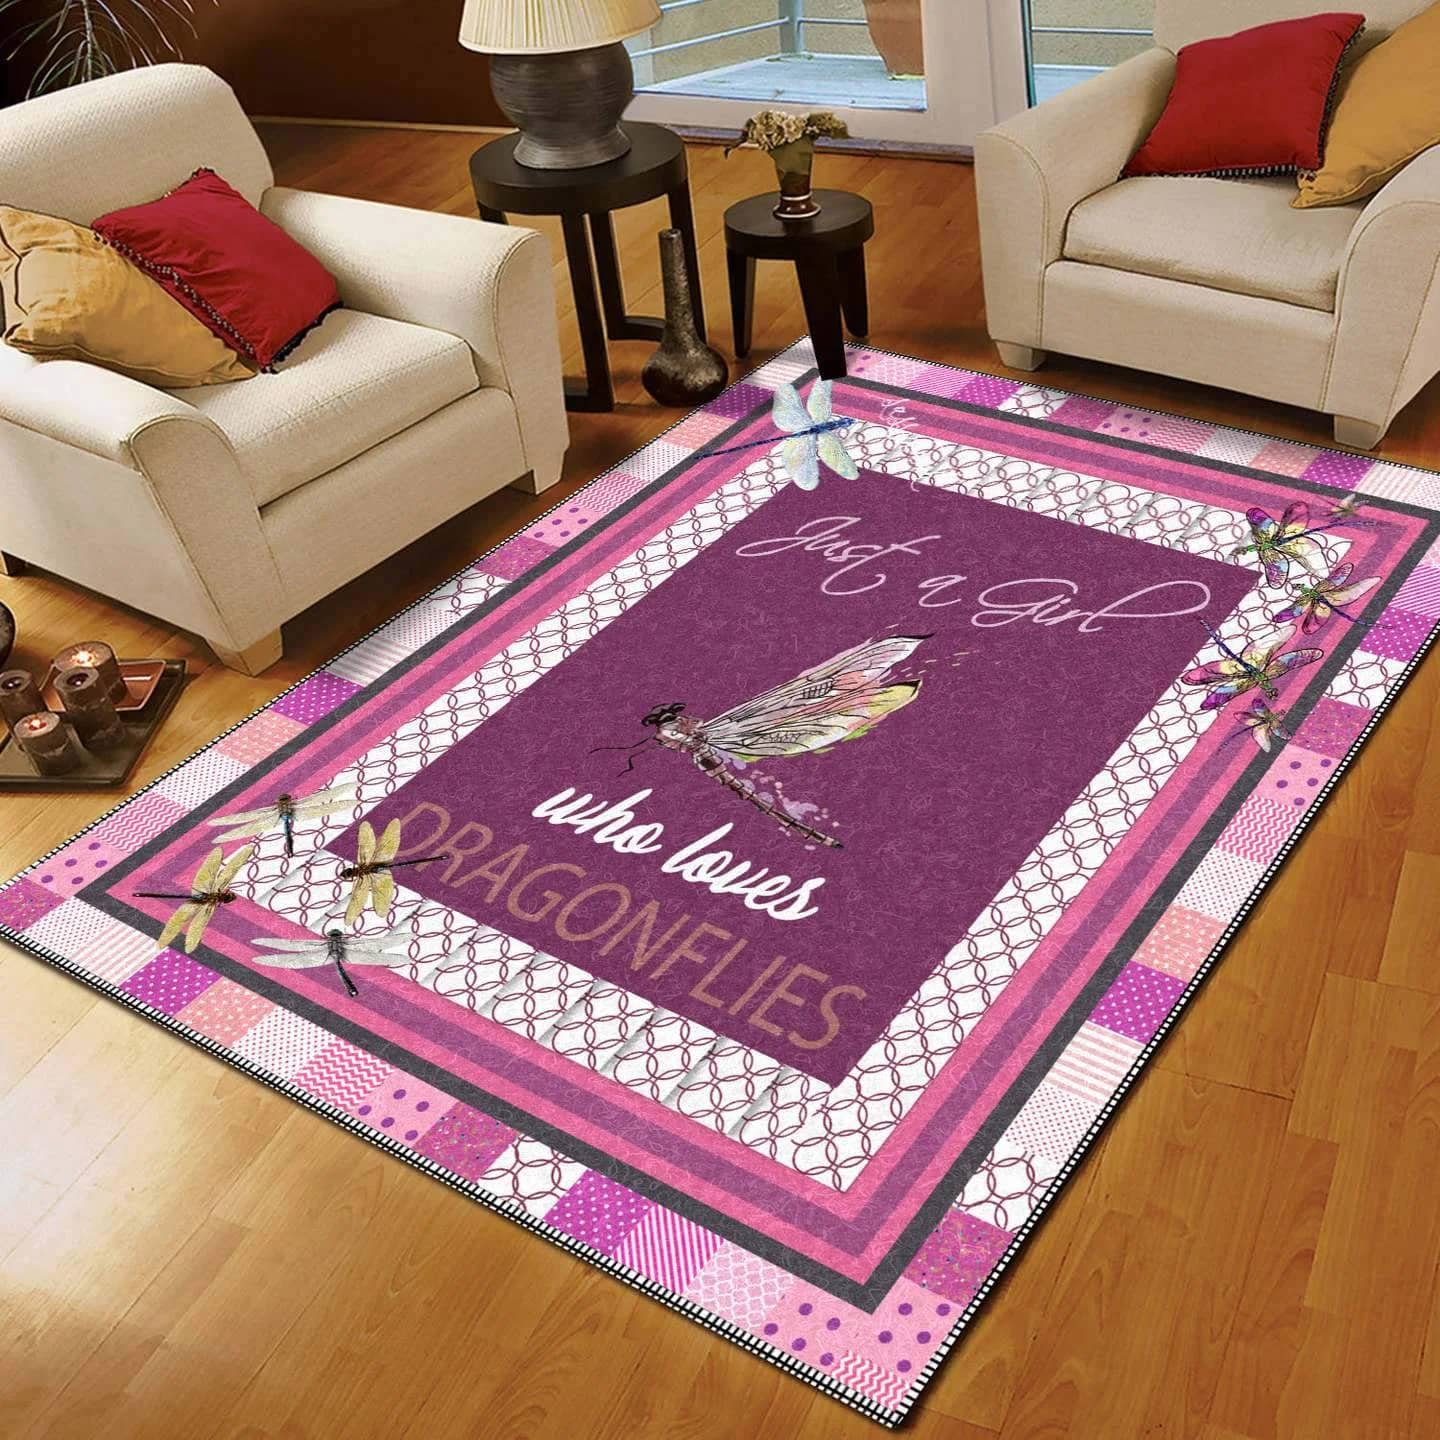 Dragonfly Limited Edition Amazon Best Seller Sku 267137 Rug